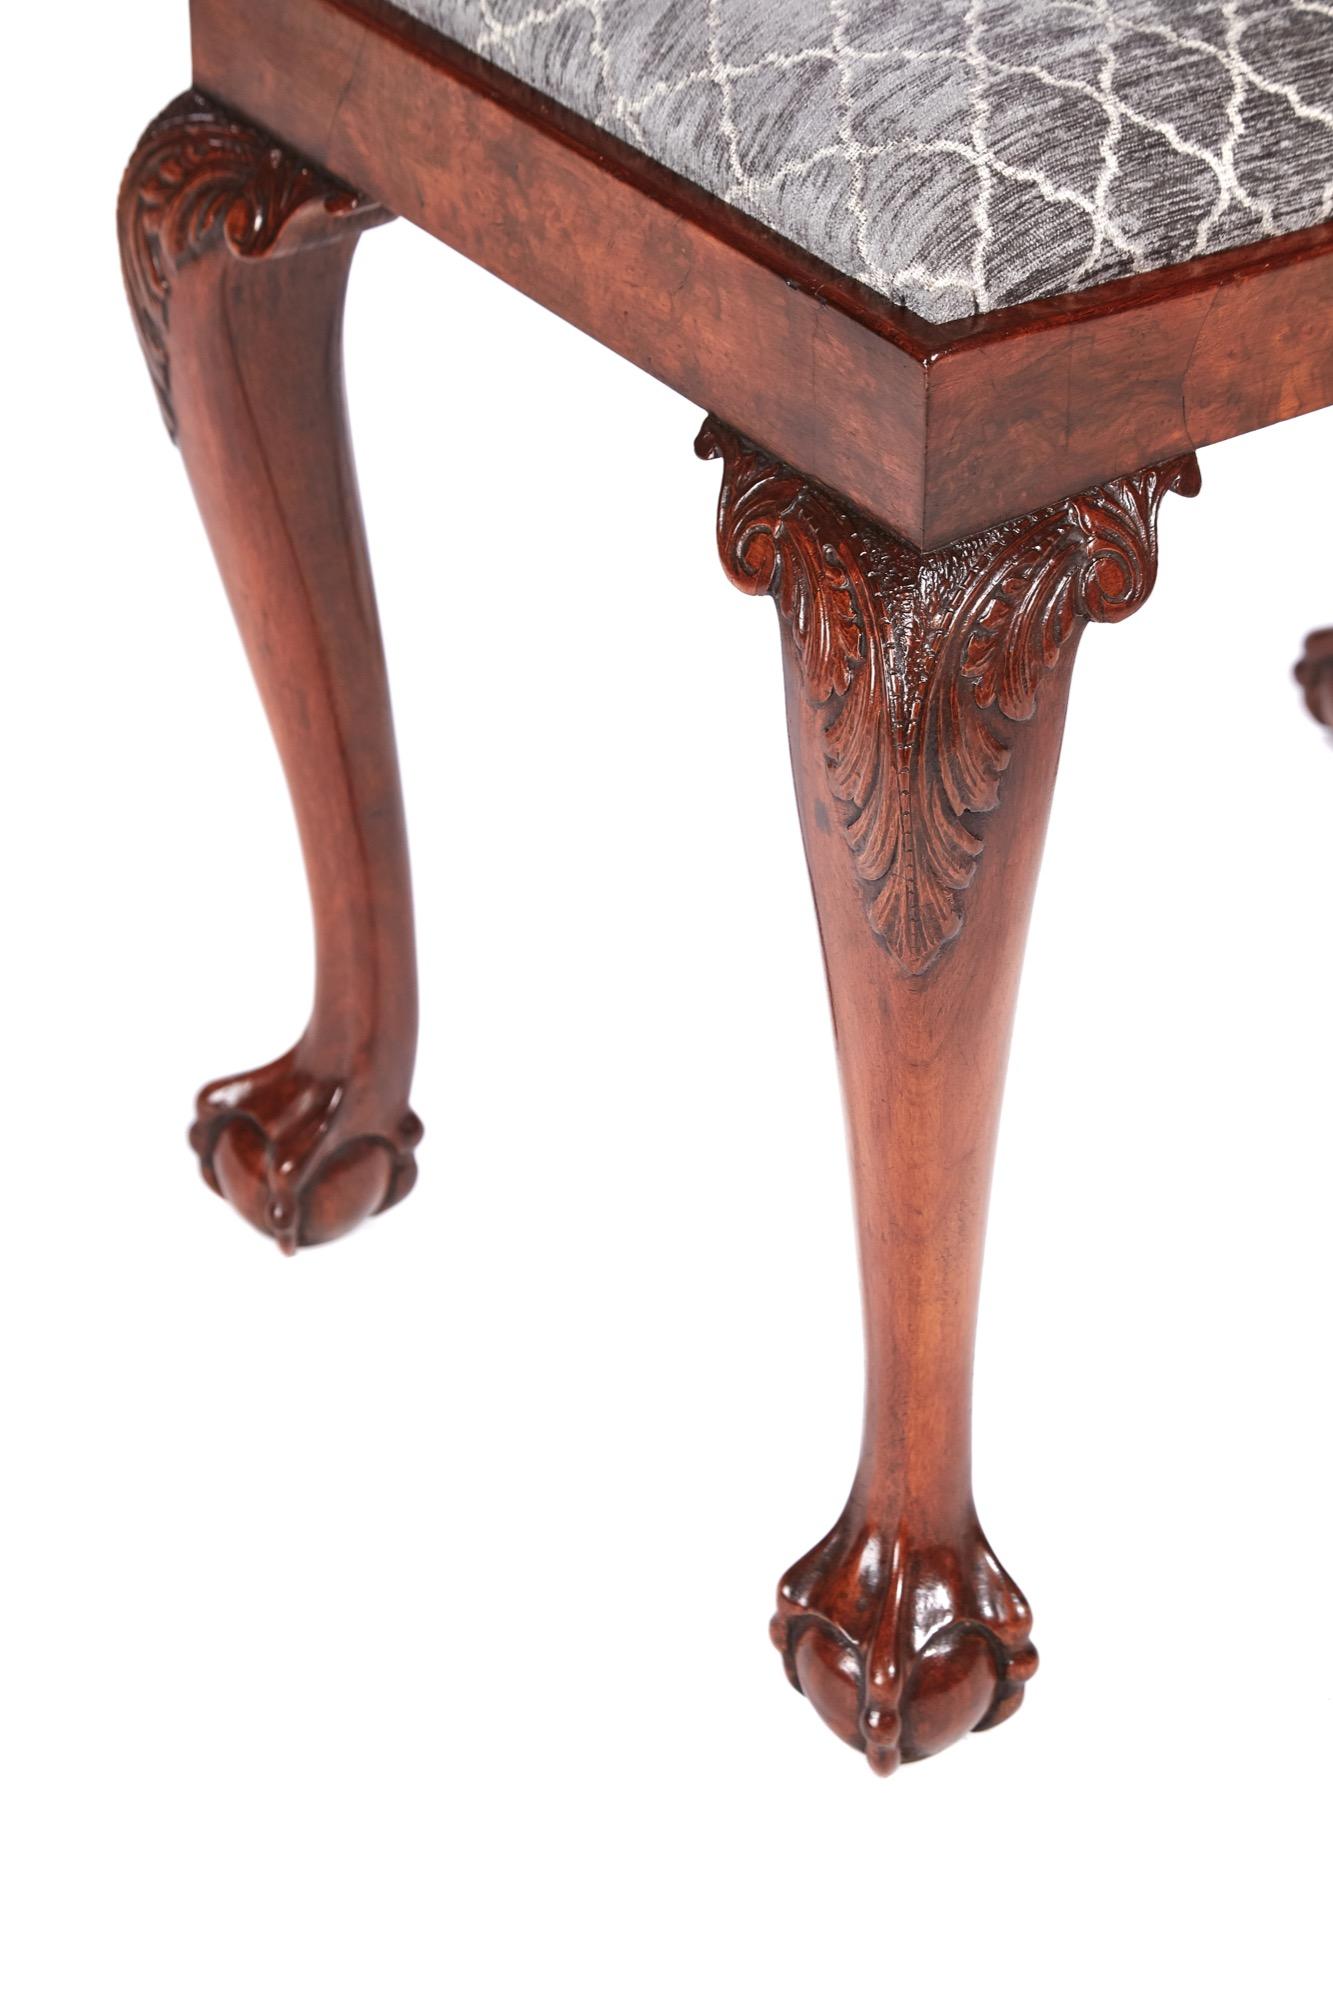 Quality antique burr walnut carved stool having a newly recovered drop in seat, lovely burr walnut frieze standing on 4 shaped carved cabriole legs with claw and ball feet.
Lovely color and condition
Measures: 23